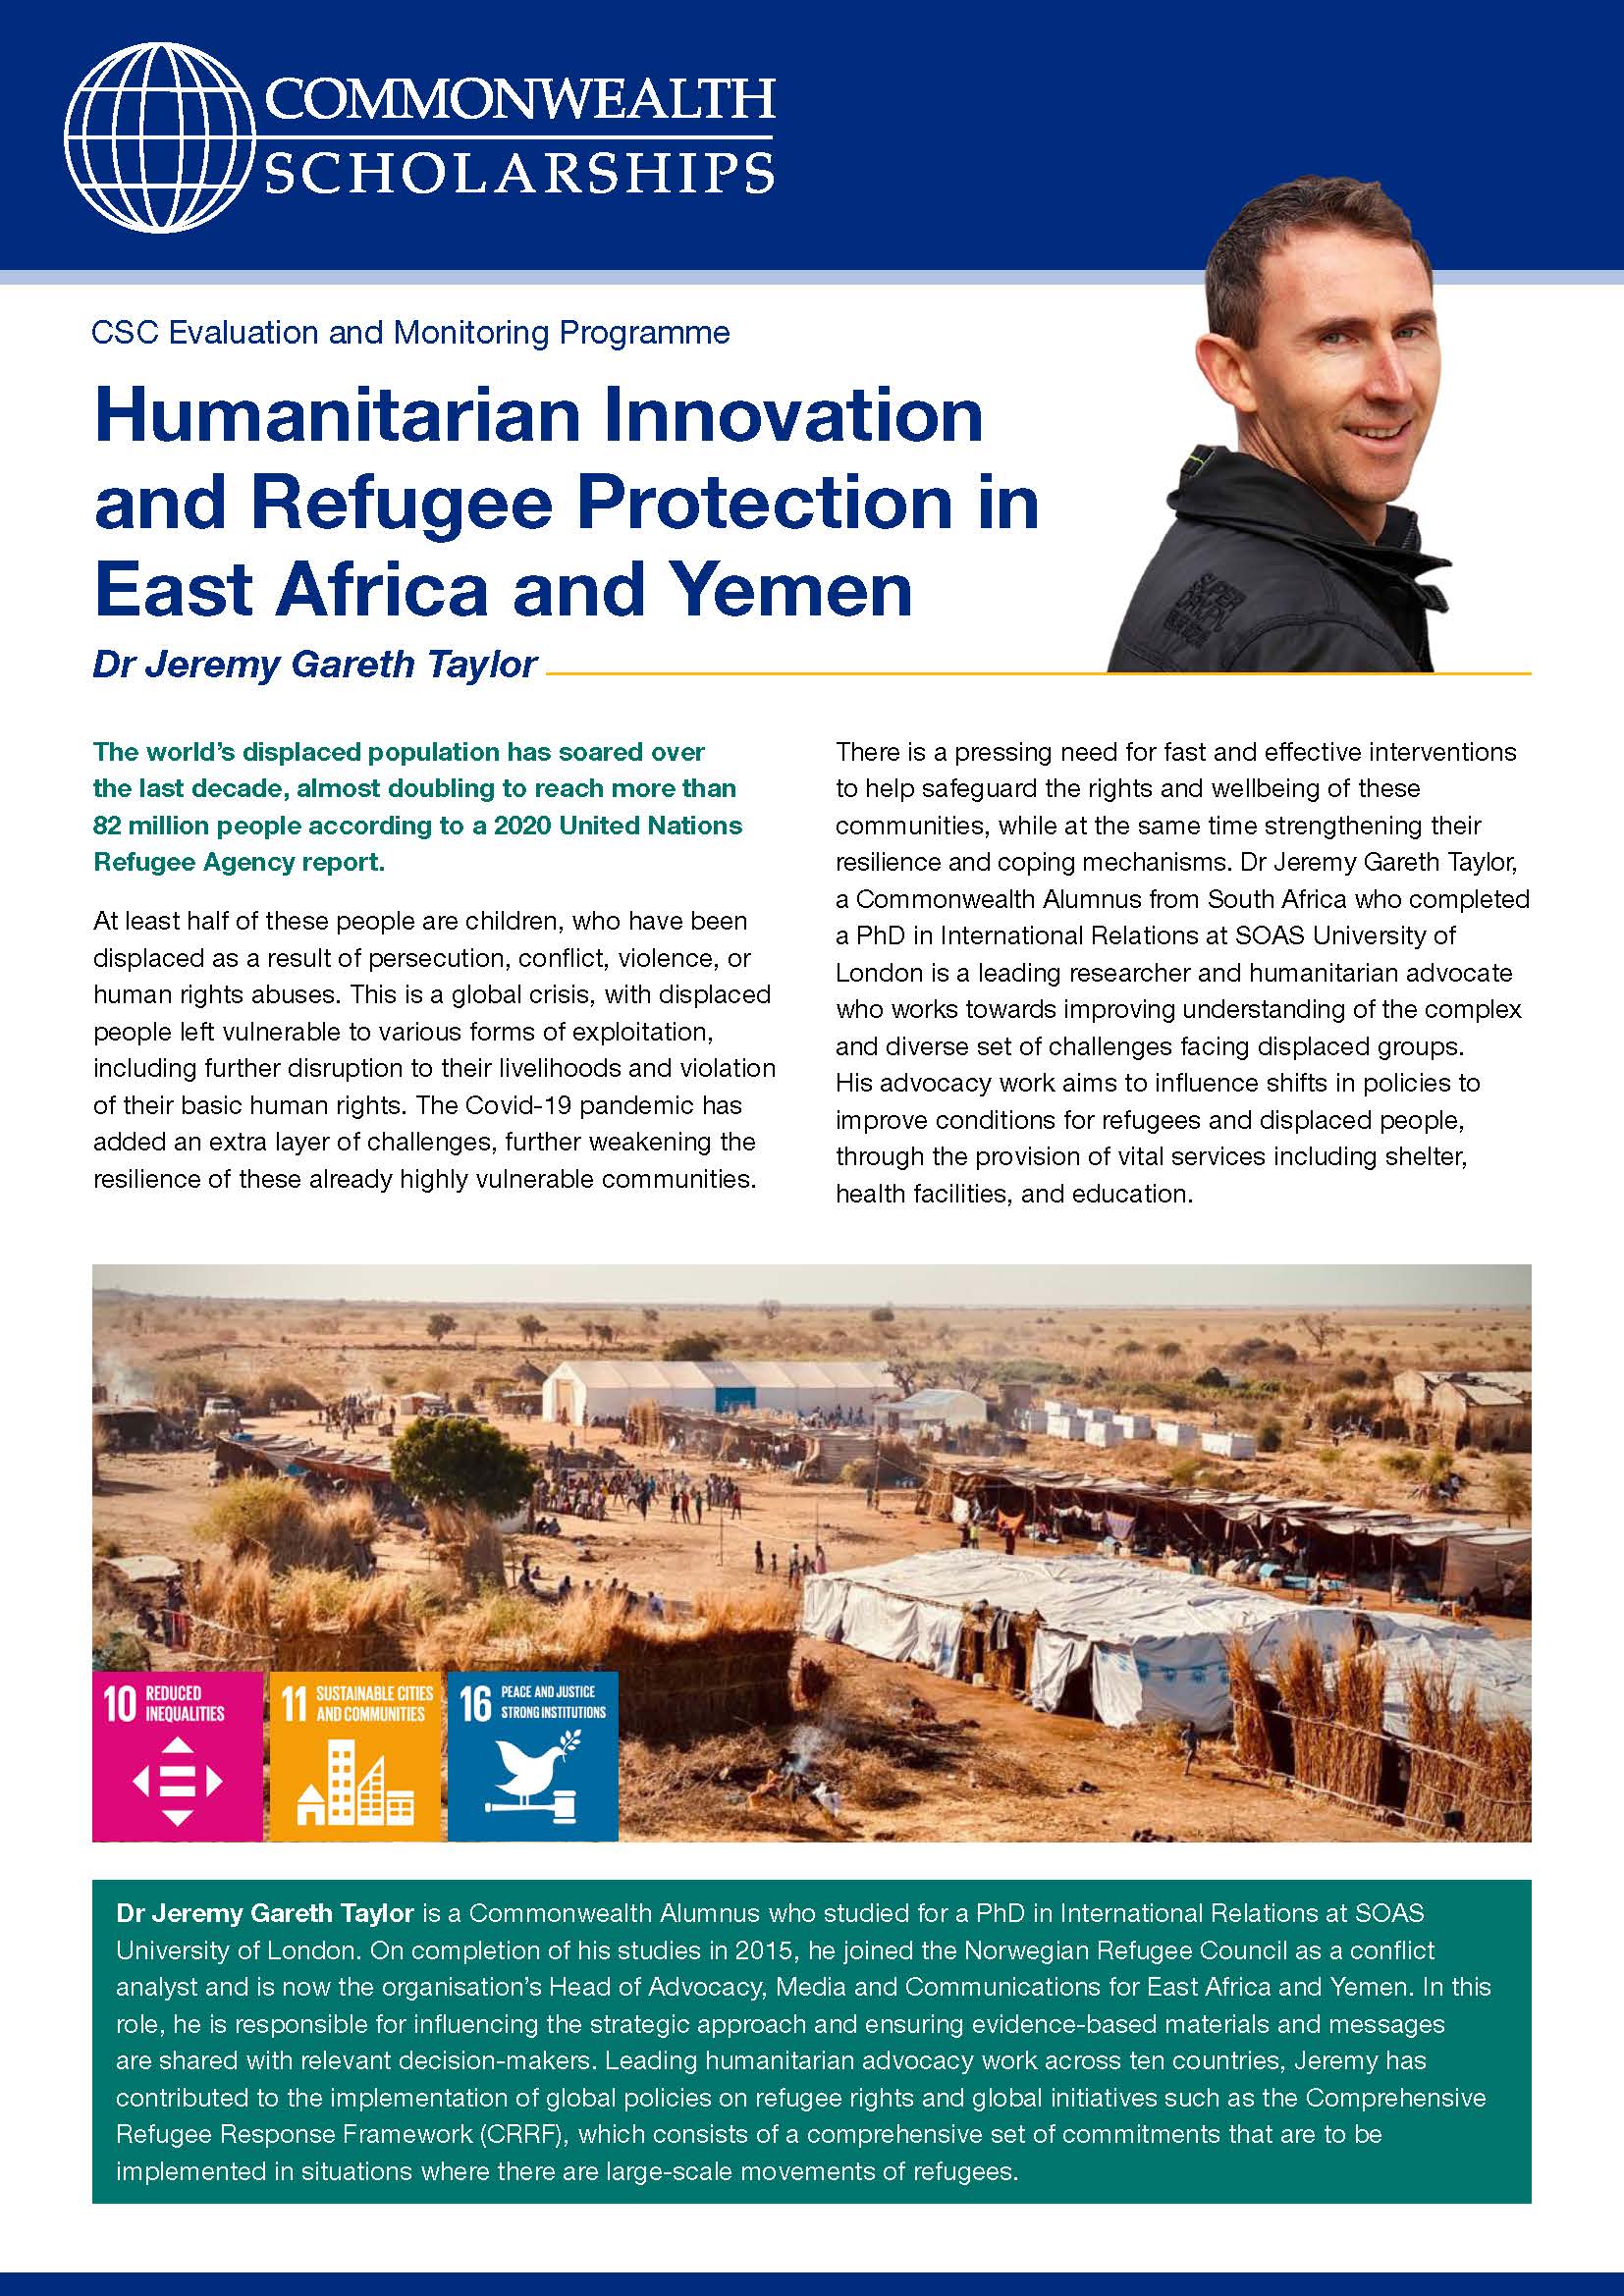 Read the Humanitarian Innovation and Refugee Protection in East Africa and Yemen case study